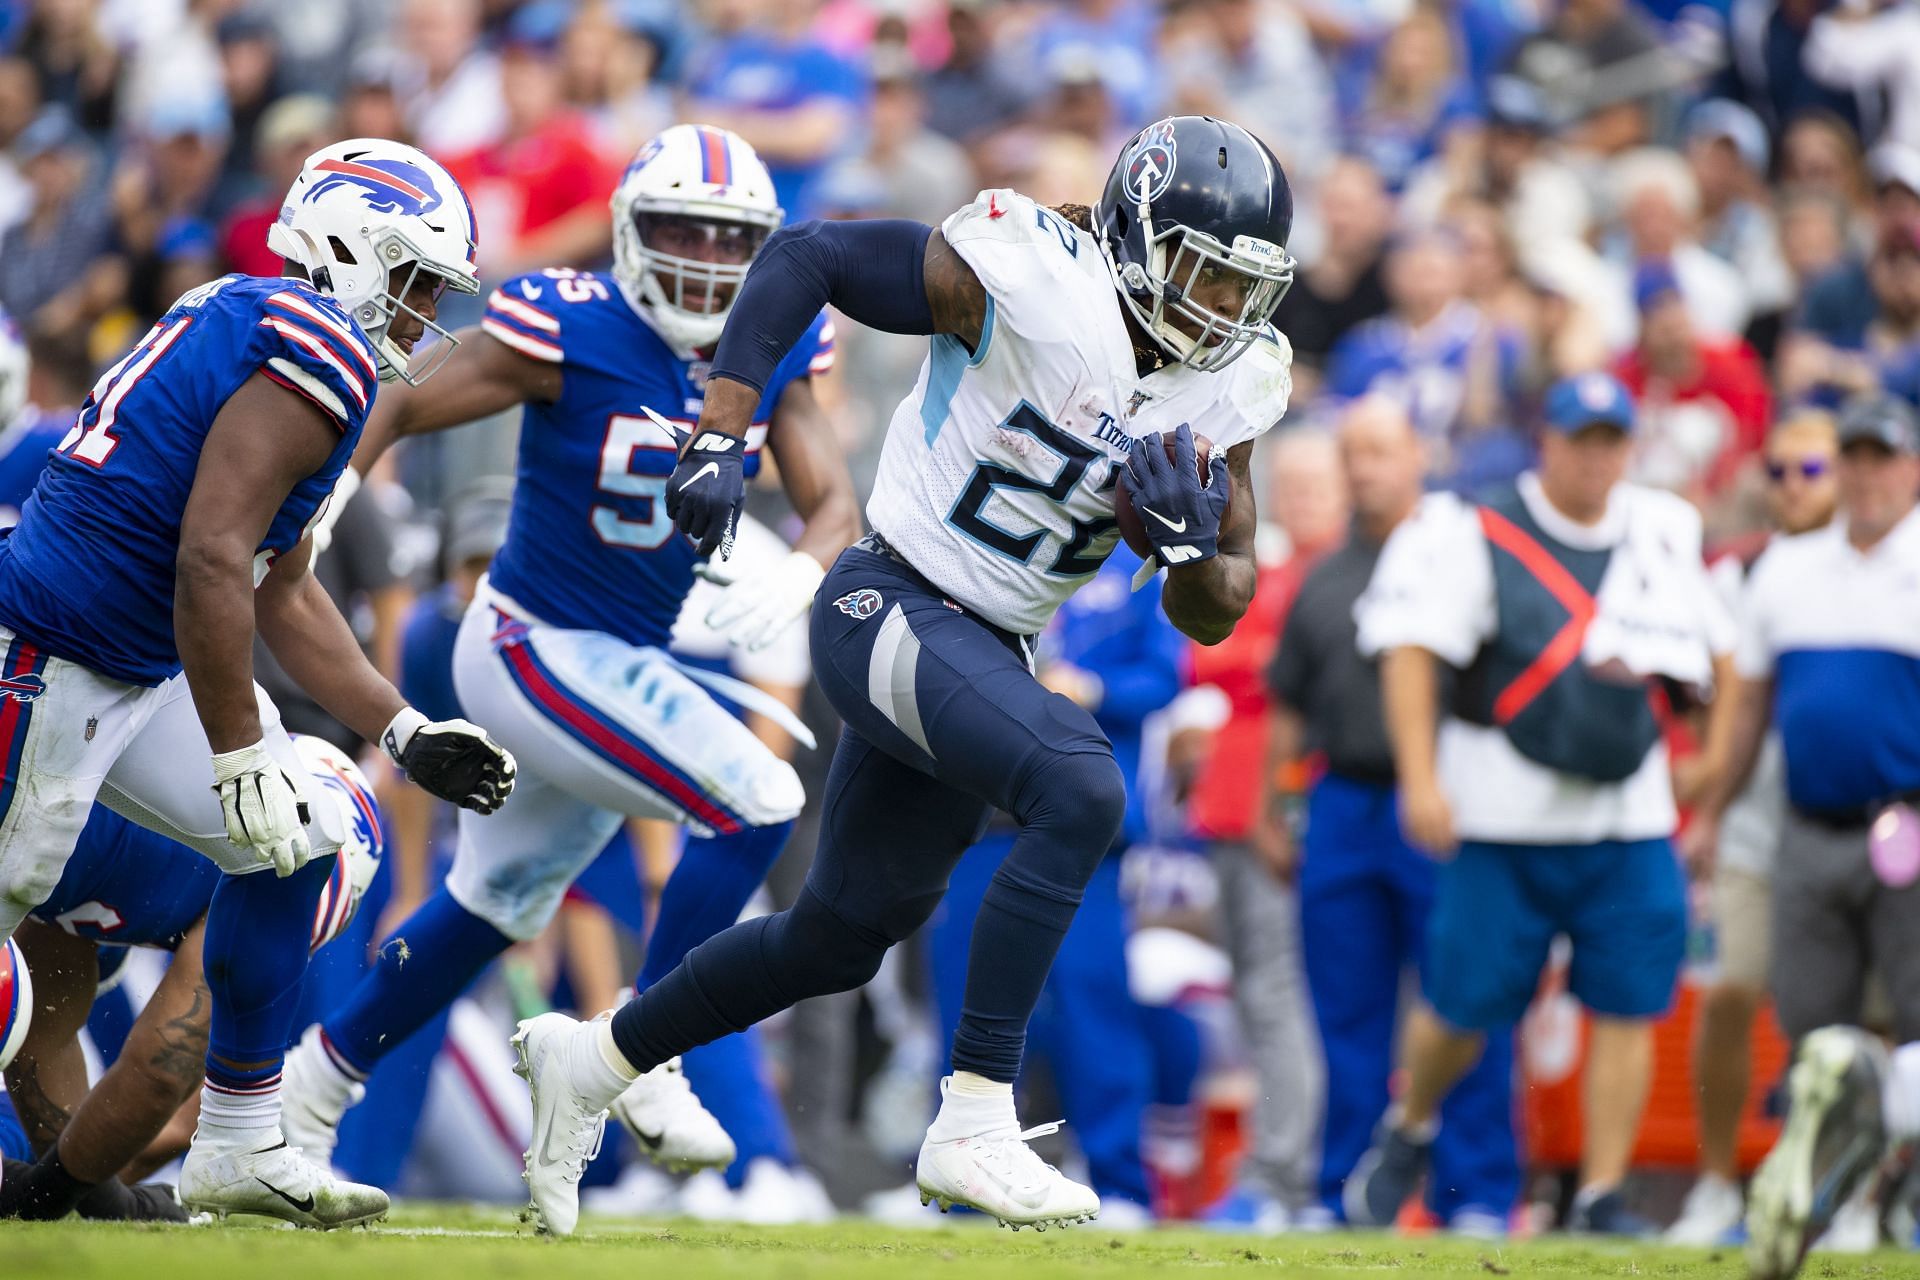 The Buffalo Bills will face the Tennessee Titans in Week 6